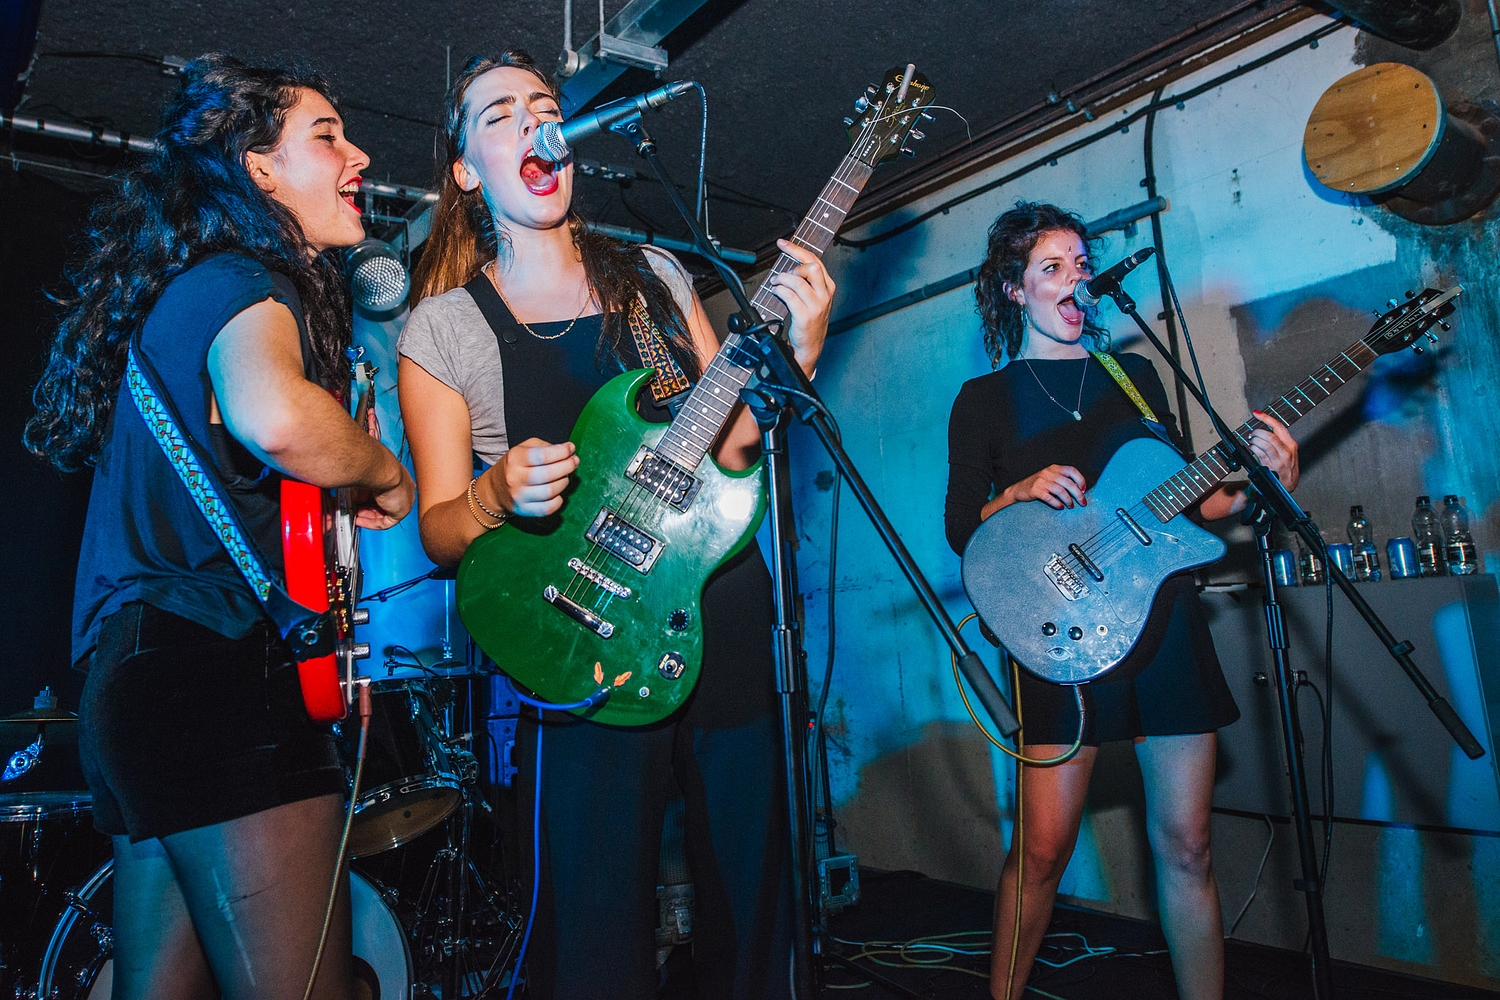 Stream Hinds’ set at Visions Festival 2015